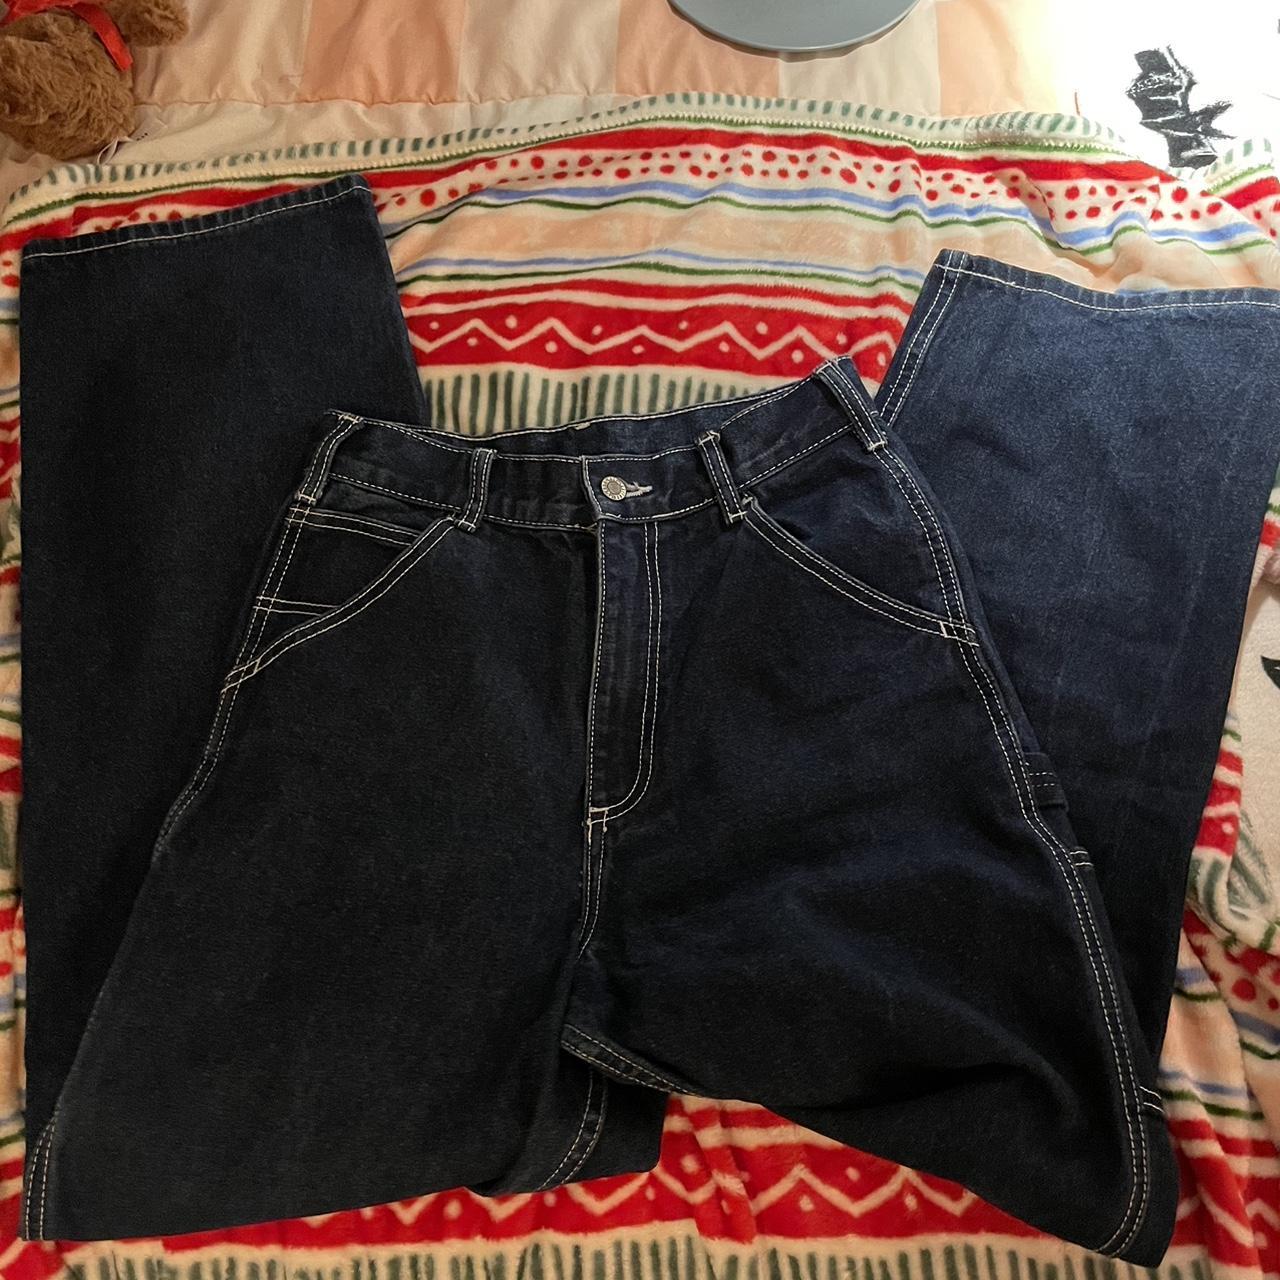 Brandy Melville Women's Navy and White Jeans